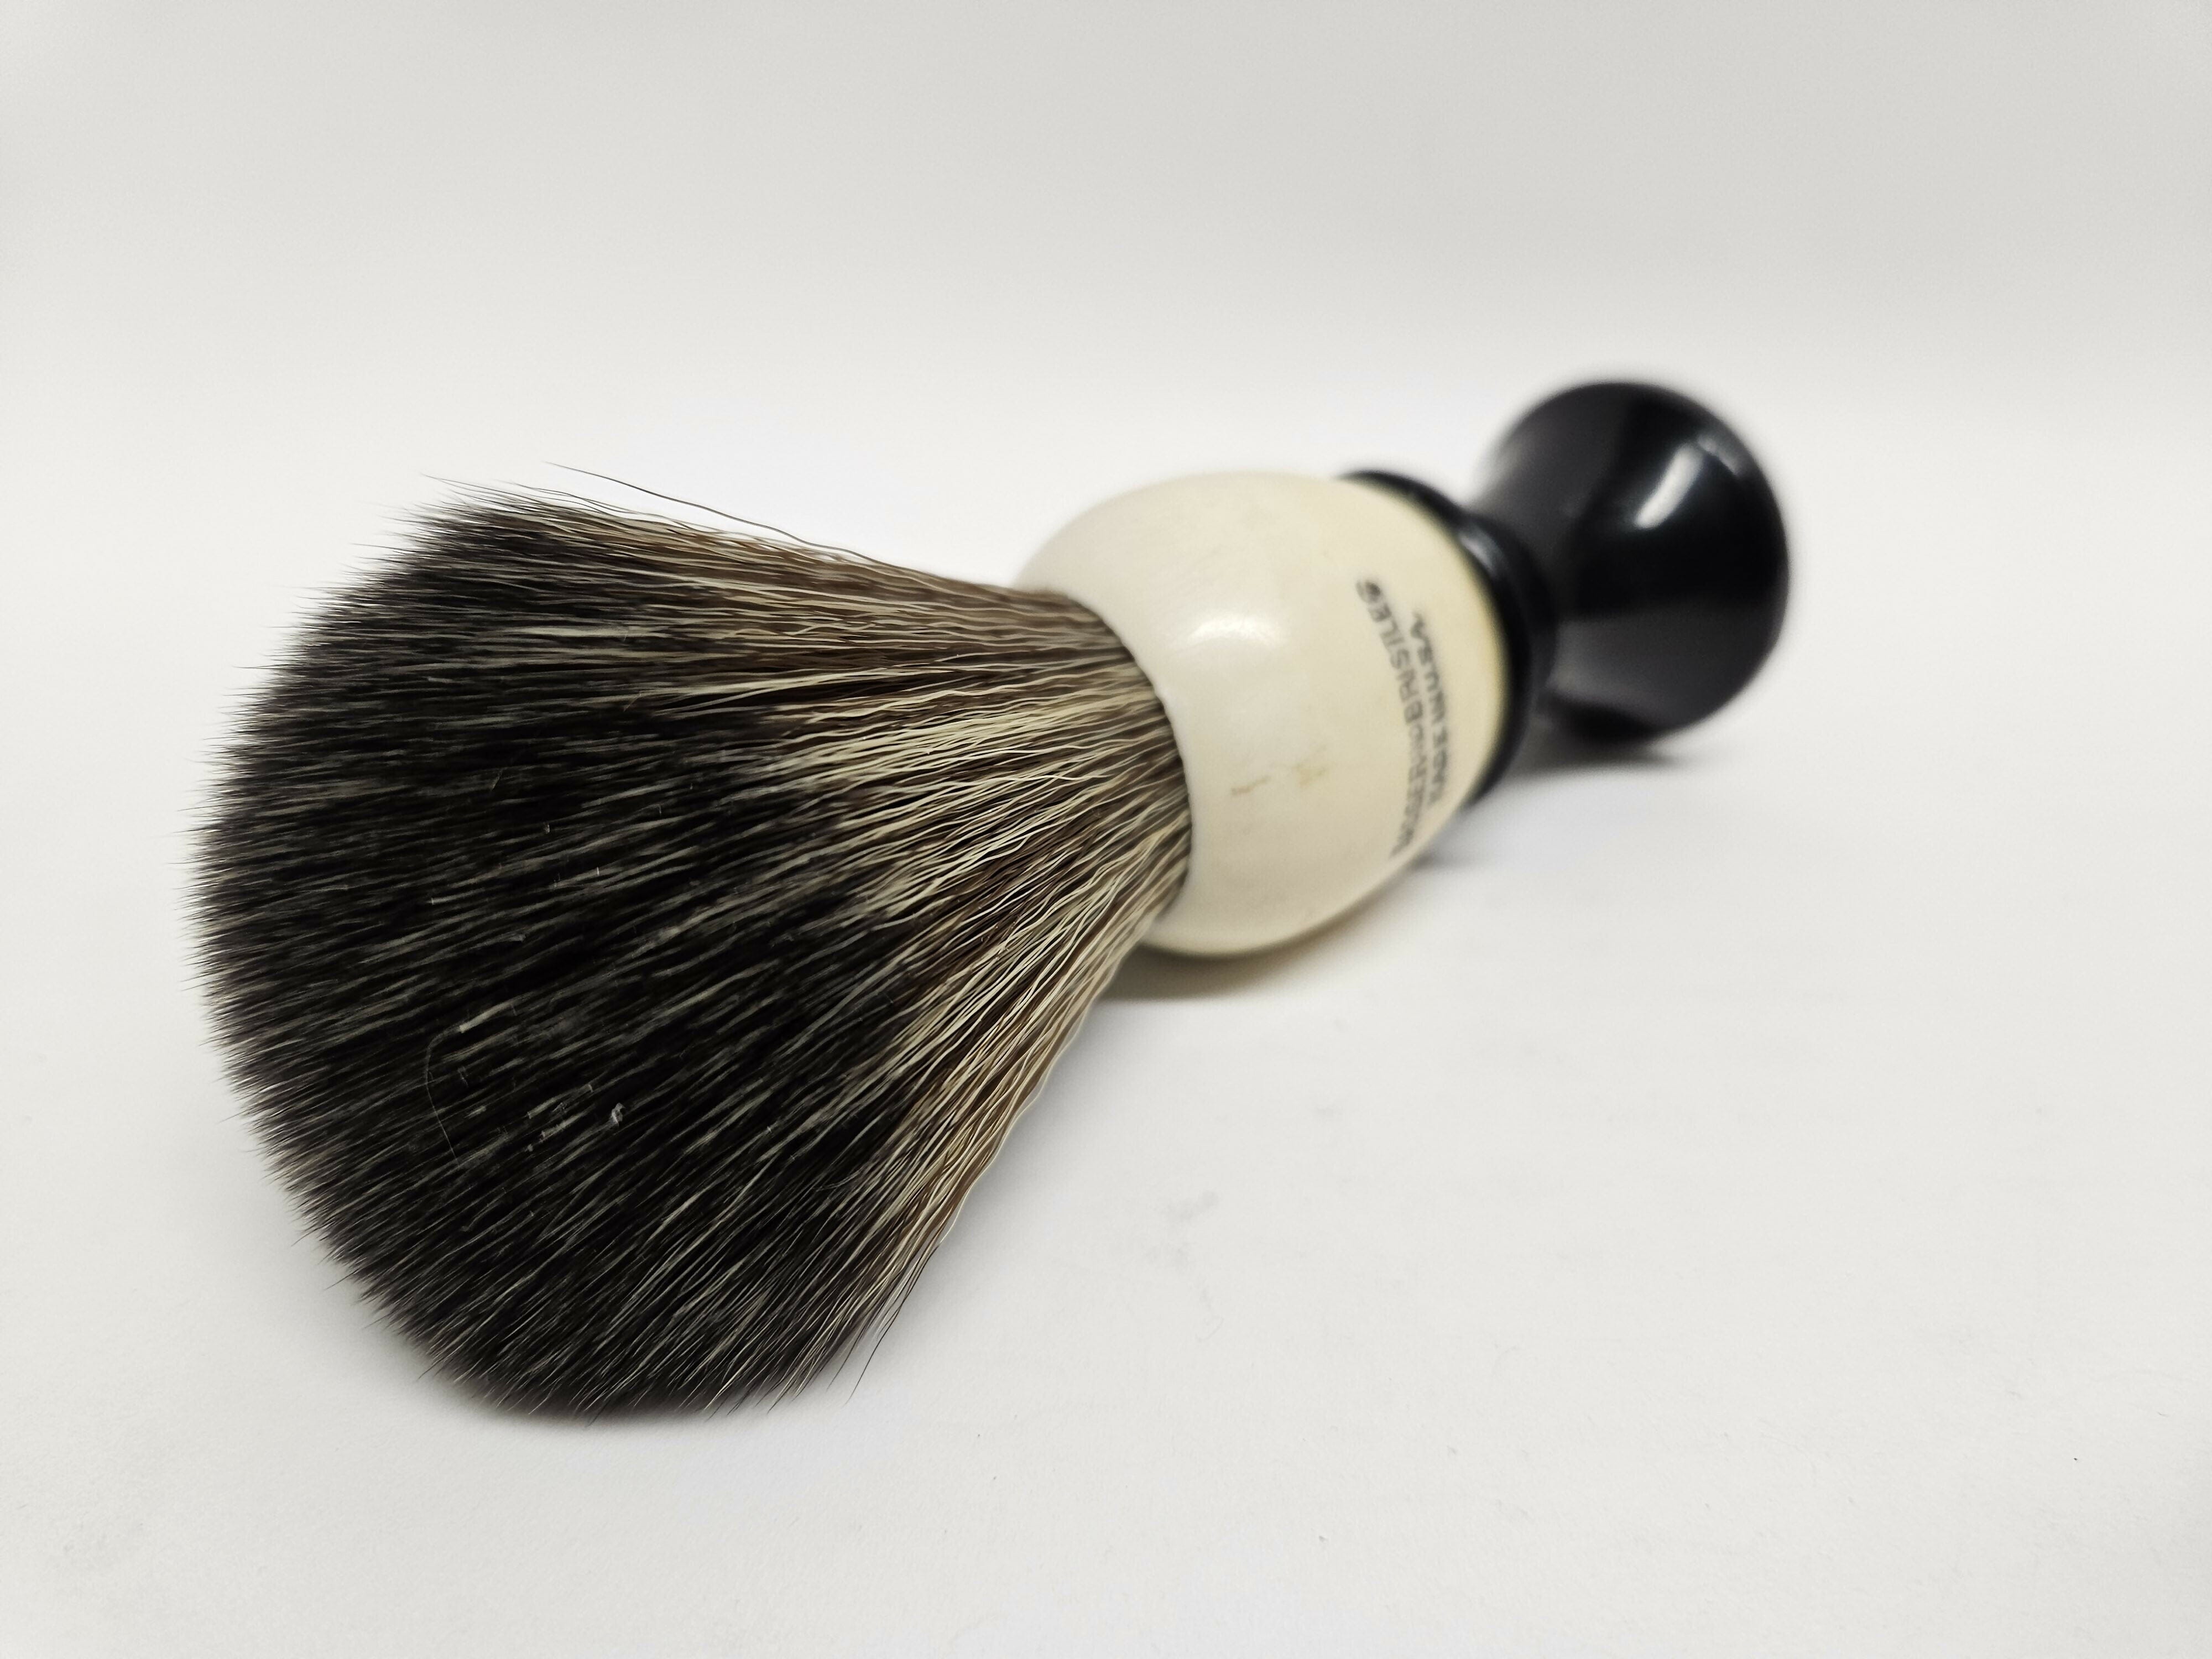 Vintage Ever-Ready 20S 23mm Shave Brush Shaving Brush Talent Soap Factory 